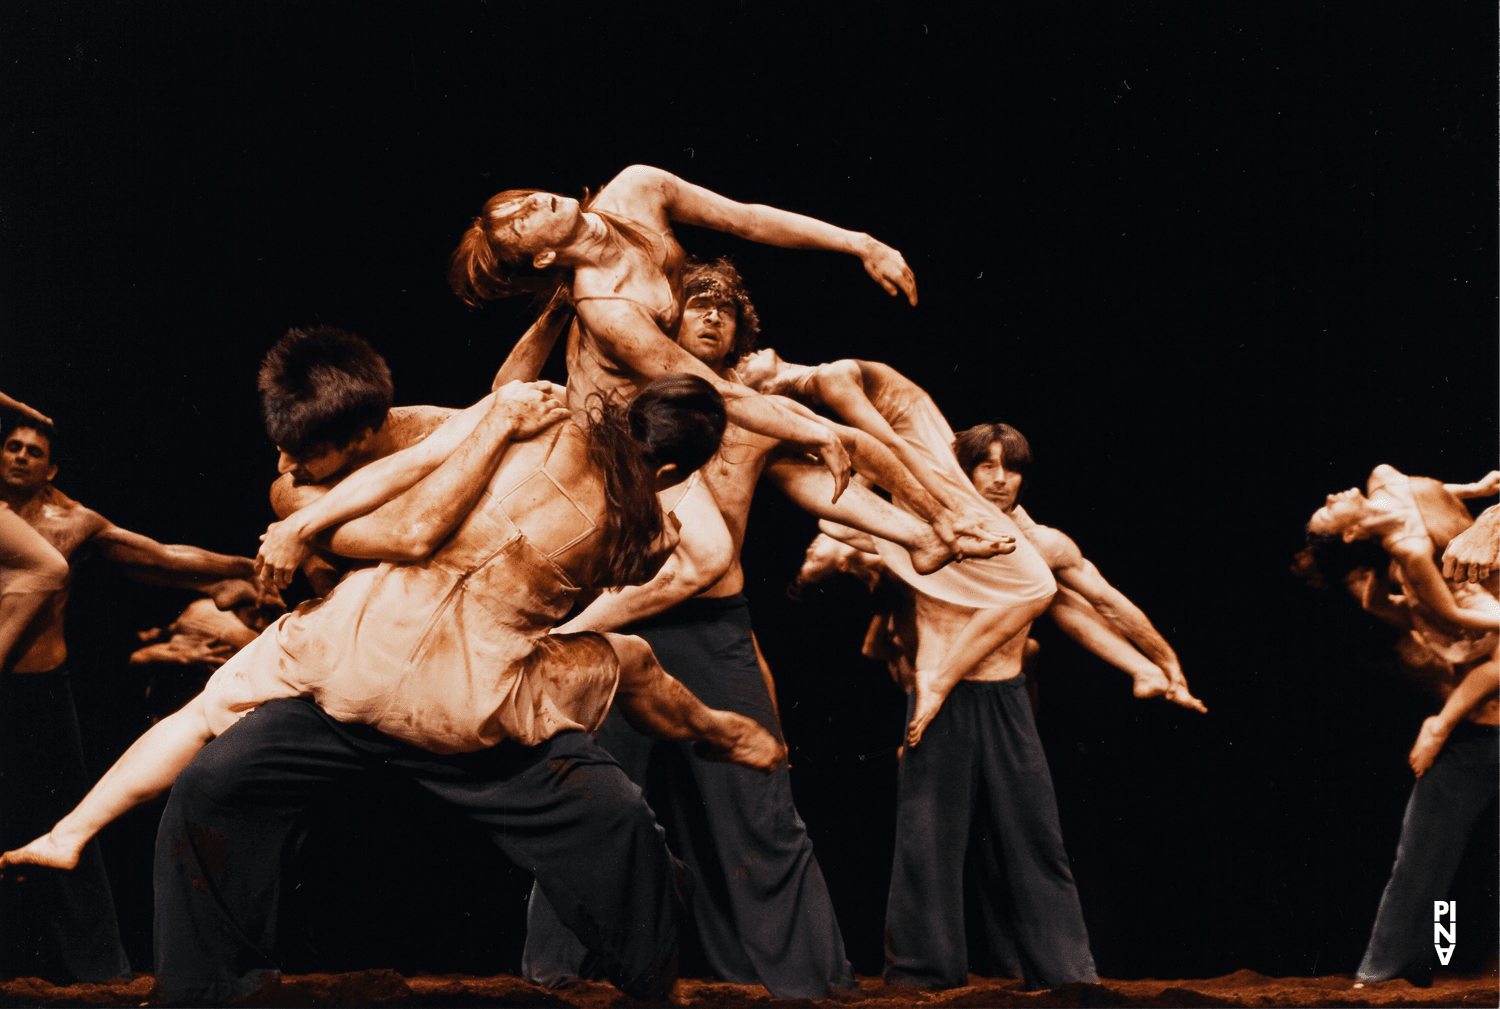 “The Rite of Spring” by Pina Bausch, Nov. 13, 2008